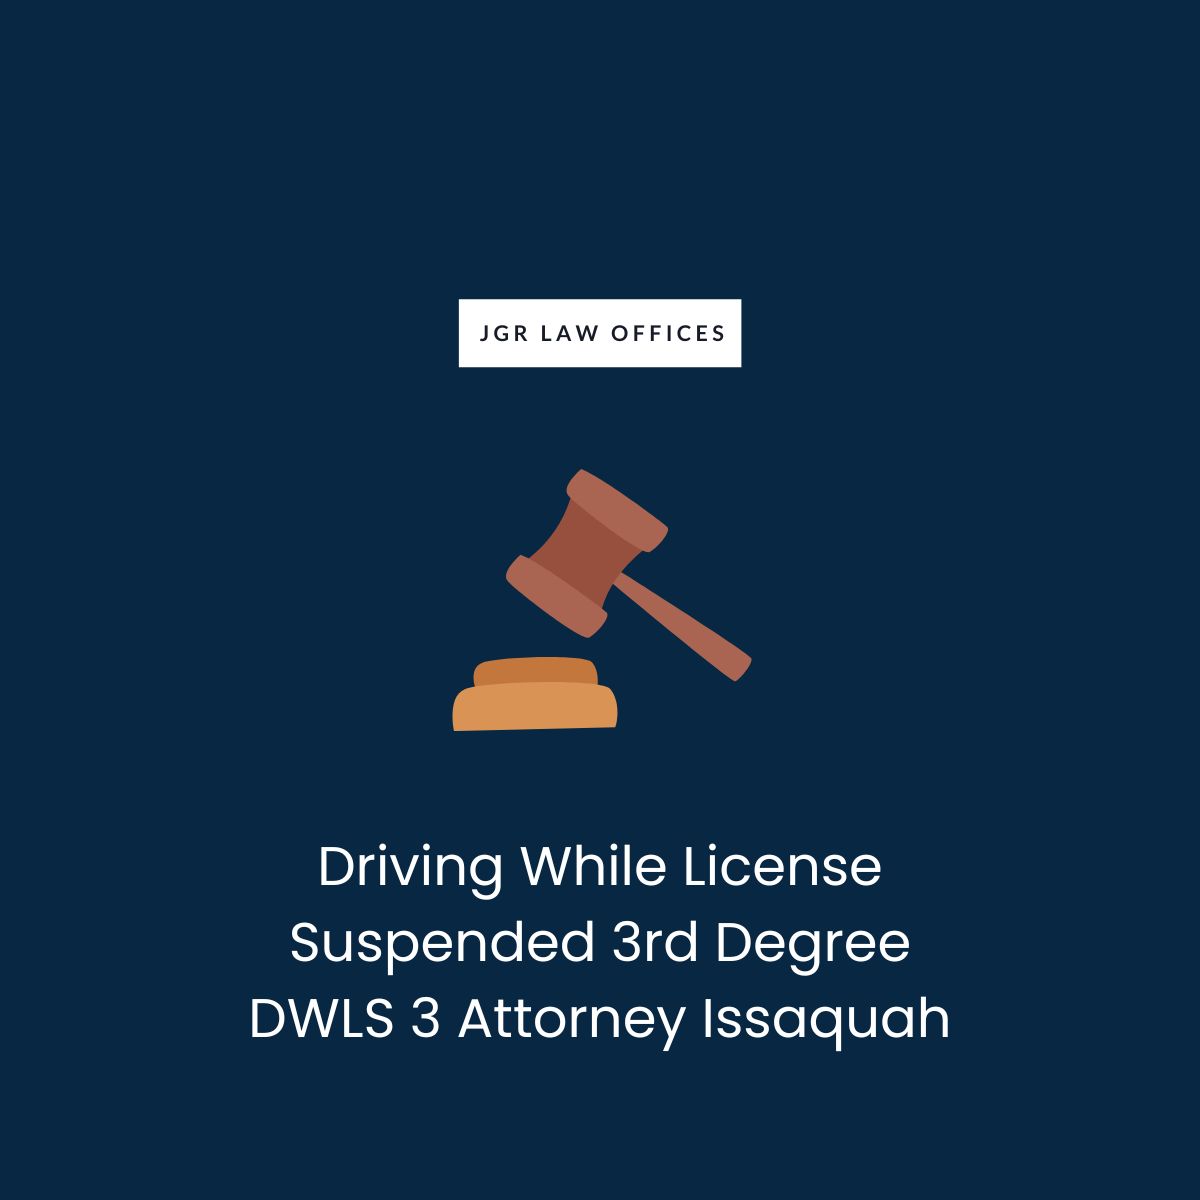 Driving While License Suspended 3rd Degree DWLS 3 Attorney Issaquah